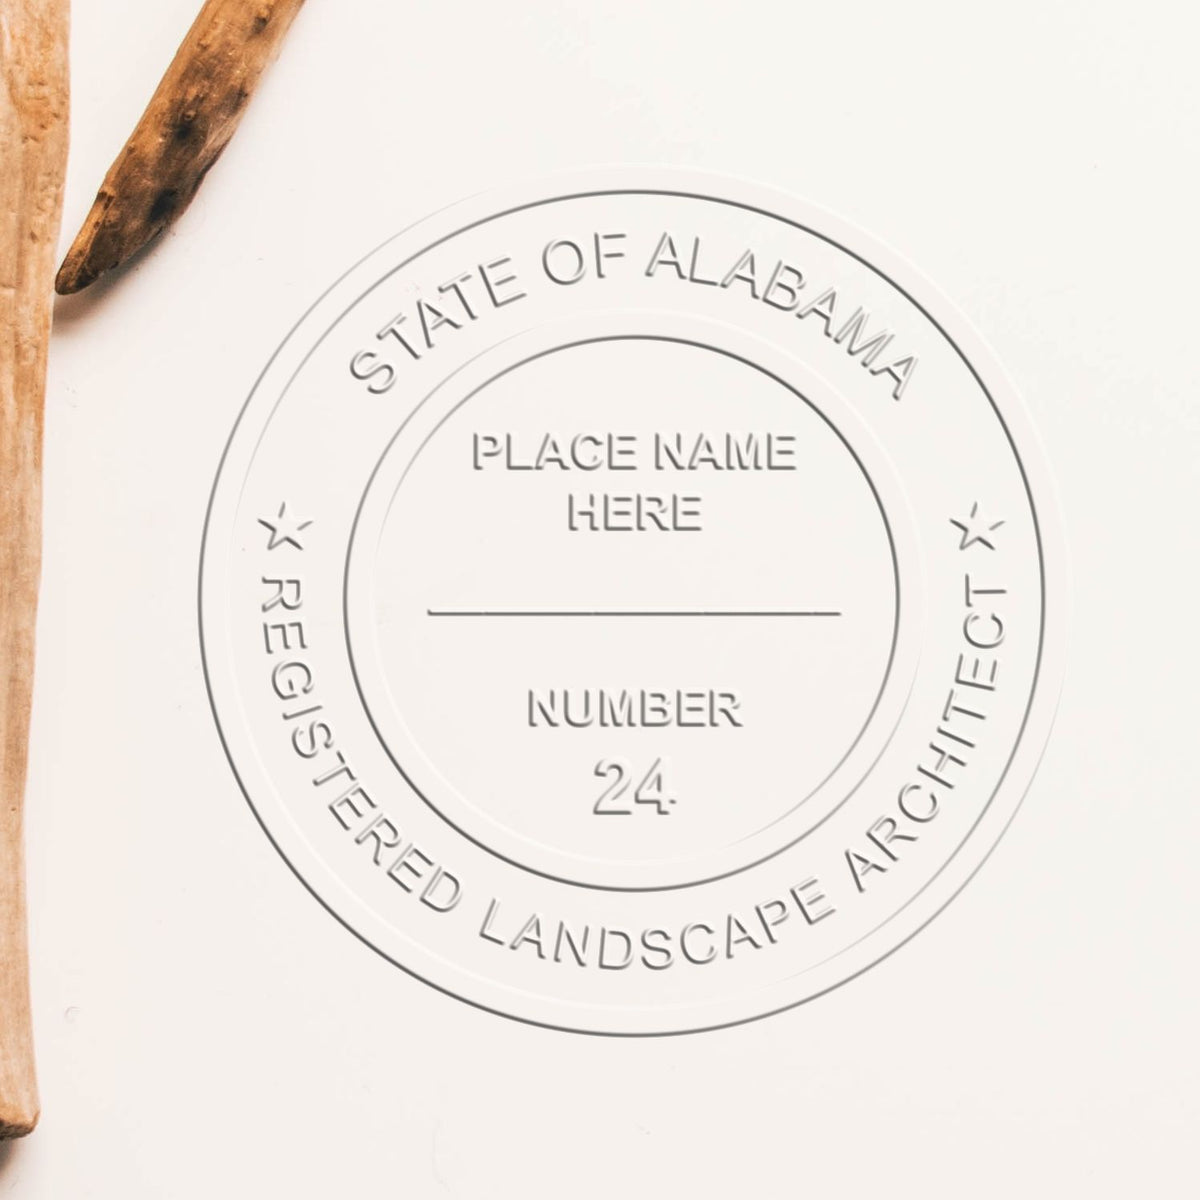 A stamped imprint of the Gift Alabama Landscape Architect Seal in this stylish lifestyle photo, setting the tone for a unique and personalized product.